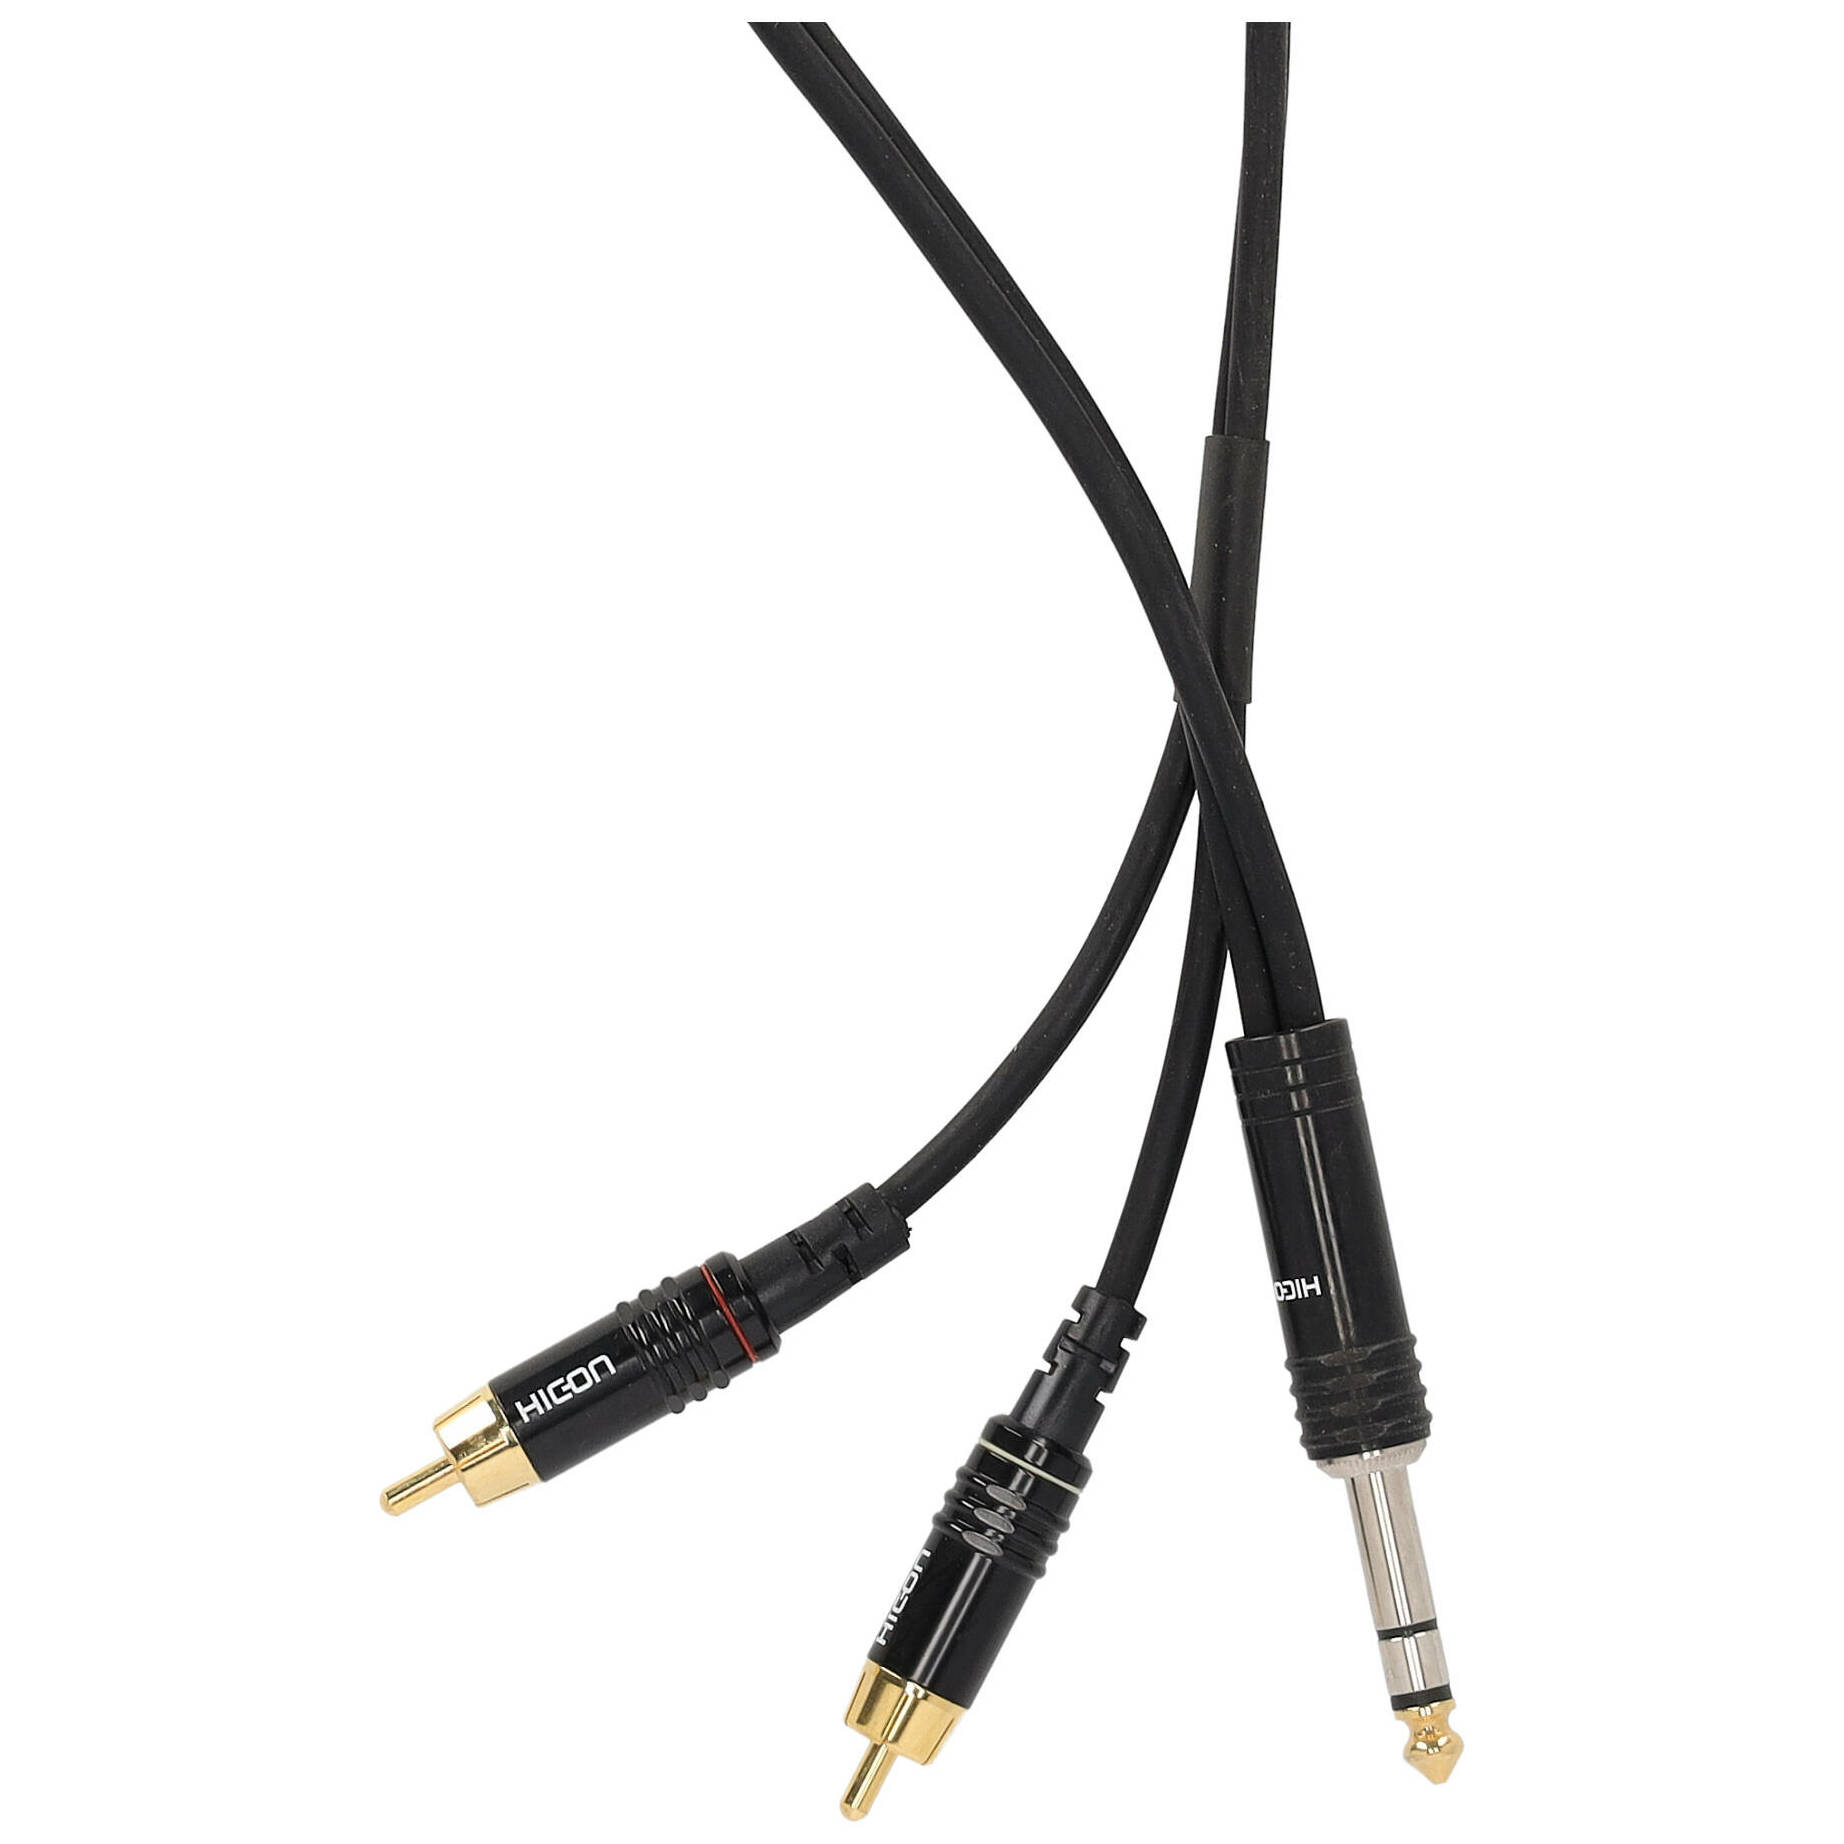 Sommer Cable ON56-0500-SW SC-Onyx Klinke Stereo Male - 2 x Cinch Male 5 Meter 2